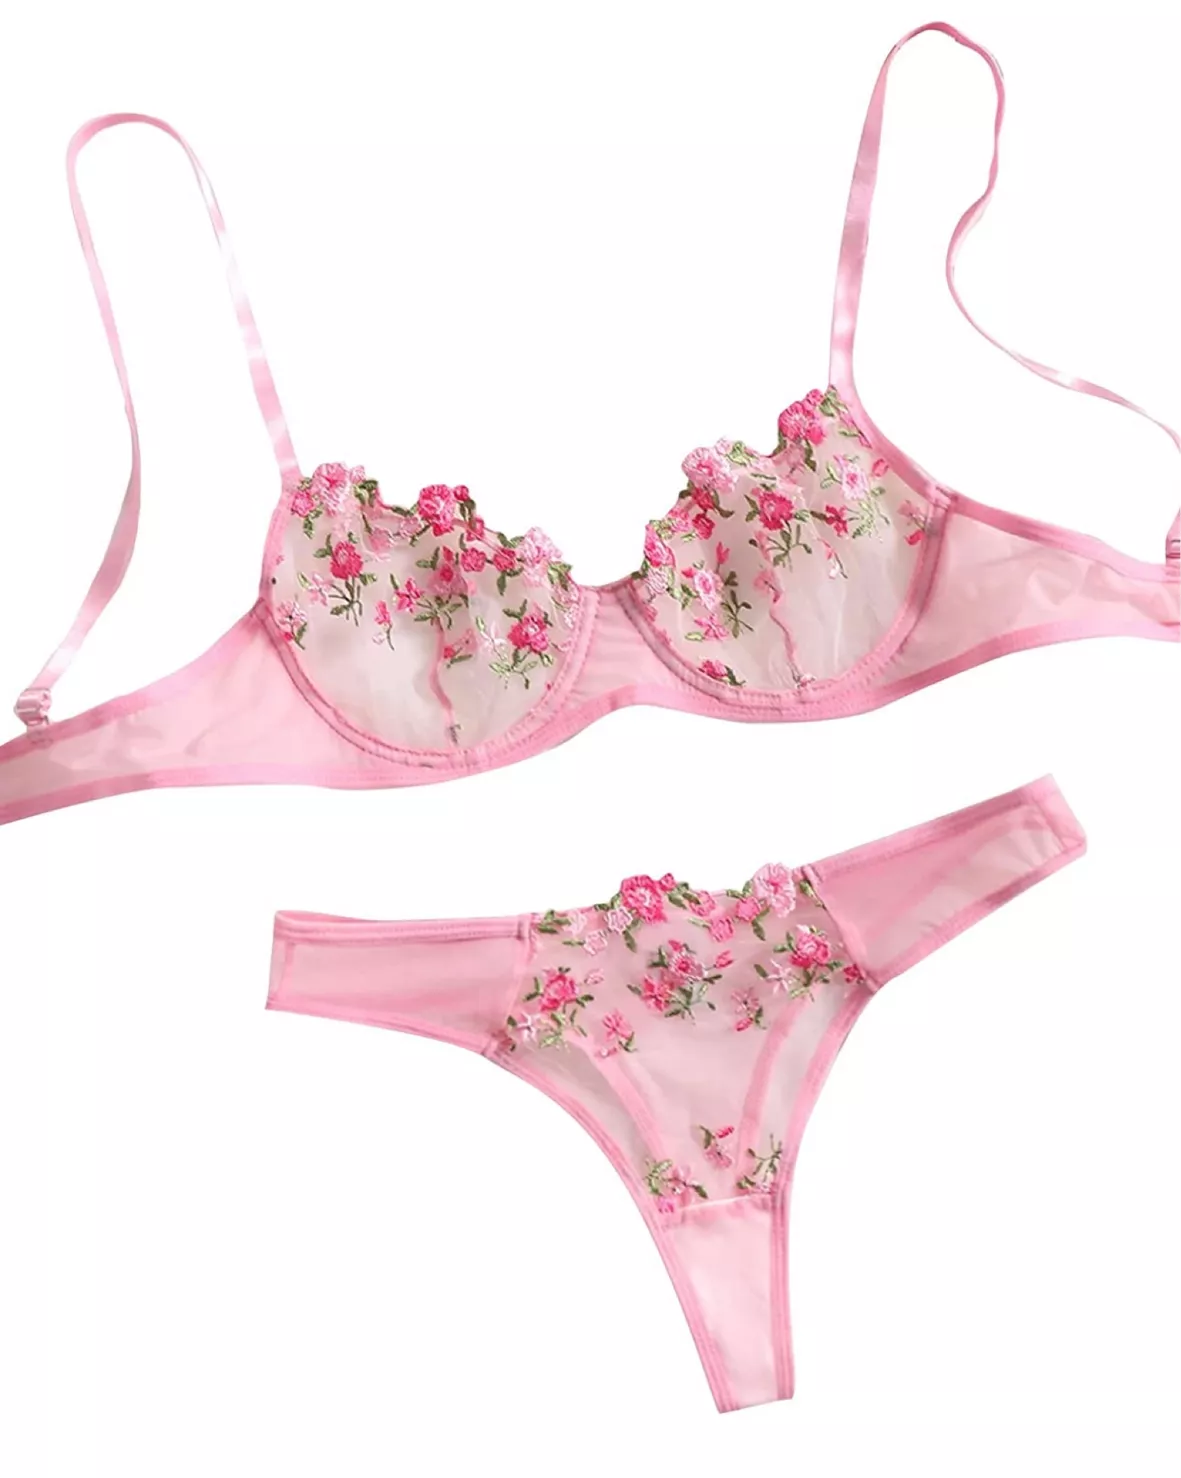  WDIRARA Women's Floral Embroidery Lingerie Set